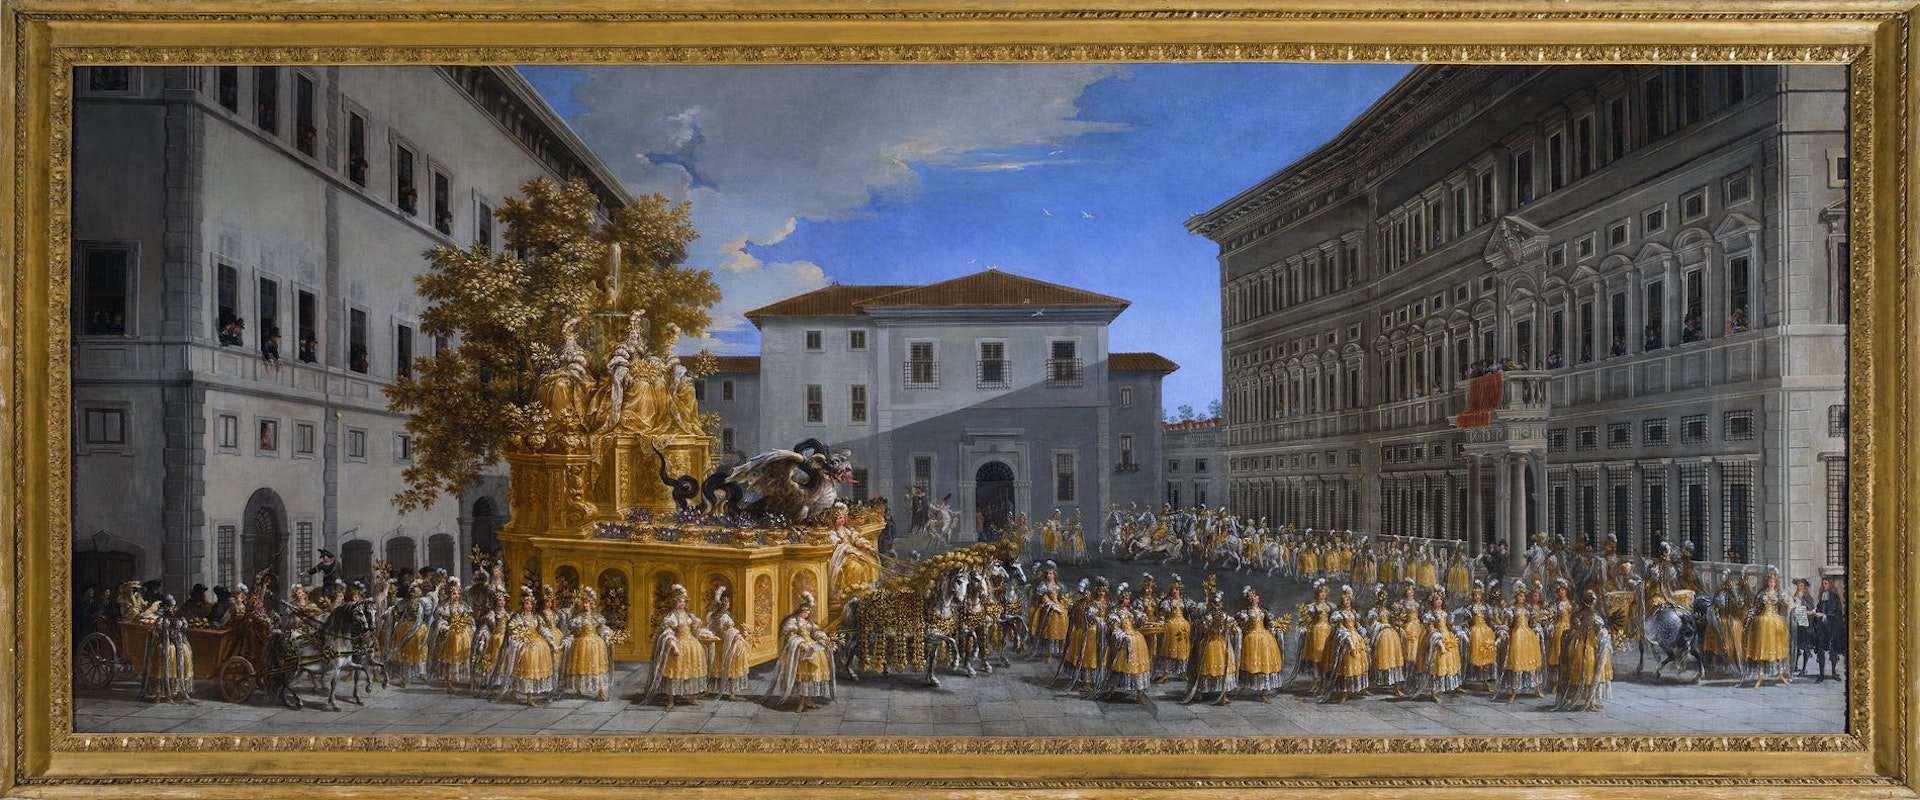 The Uffizi acquires a spectacular painting by Johann Paul Schor, a leading light in the decorative Arts of the 17th century